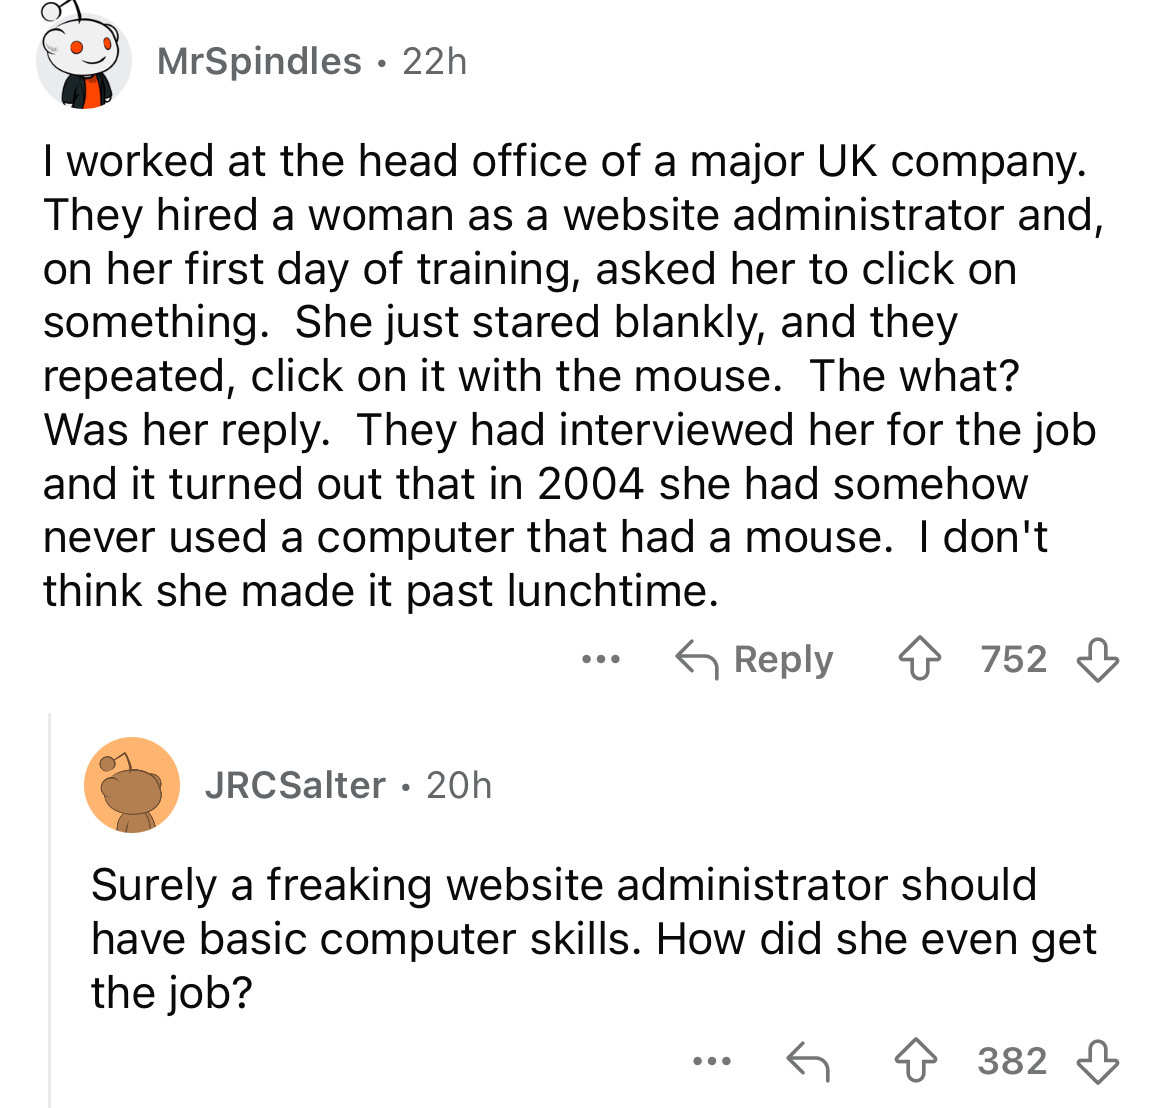 screenshot - MrSpindles 22h I worked at the head office of a major Uk company. They hired a woman as a website administrator and, on her first day of training, asked her to click on something. She just stared blankly, and they repeated, click on it with t